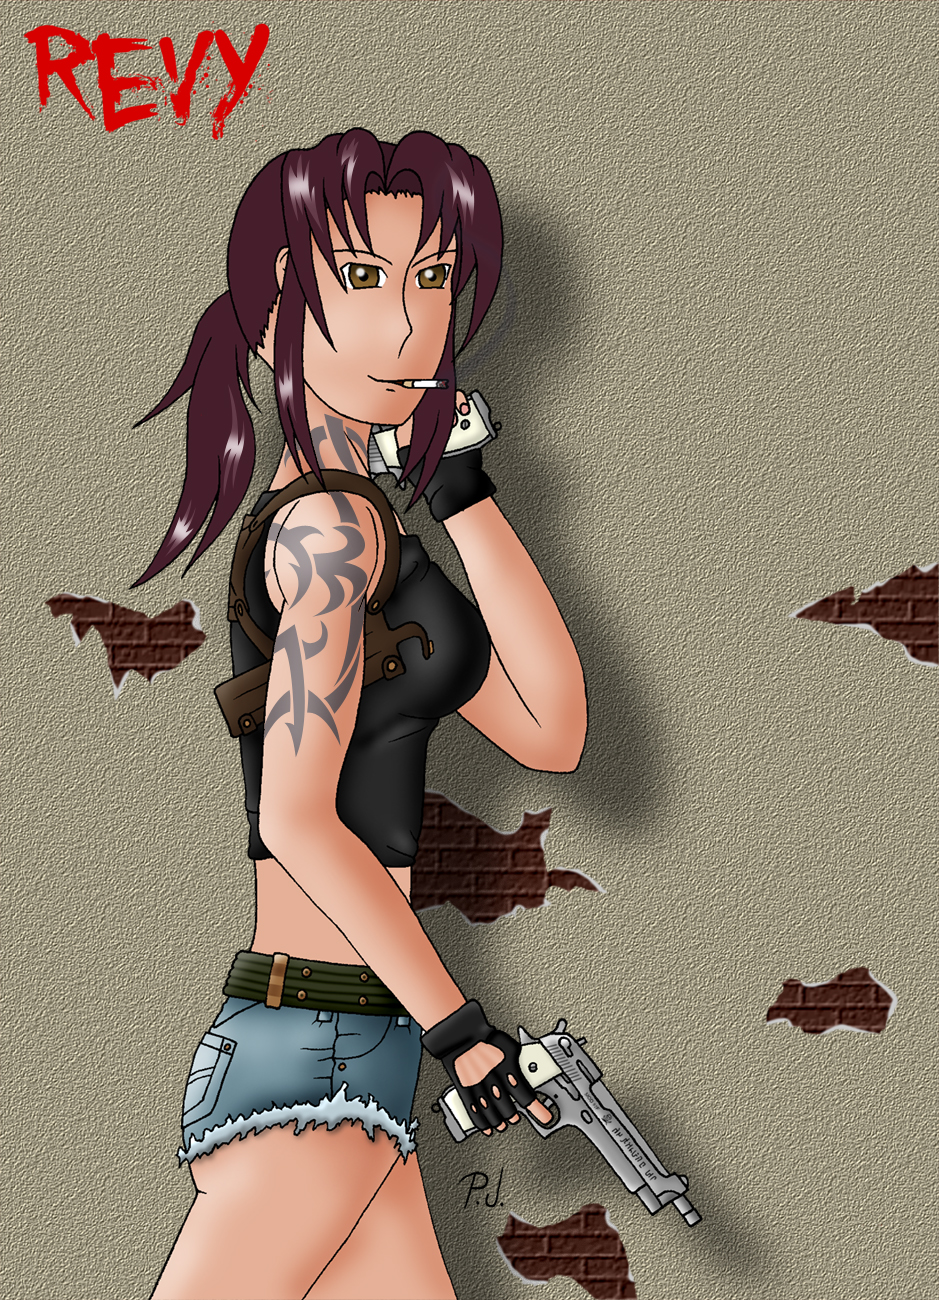 Revy by 357